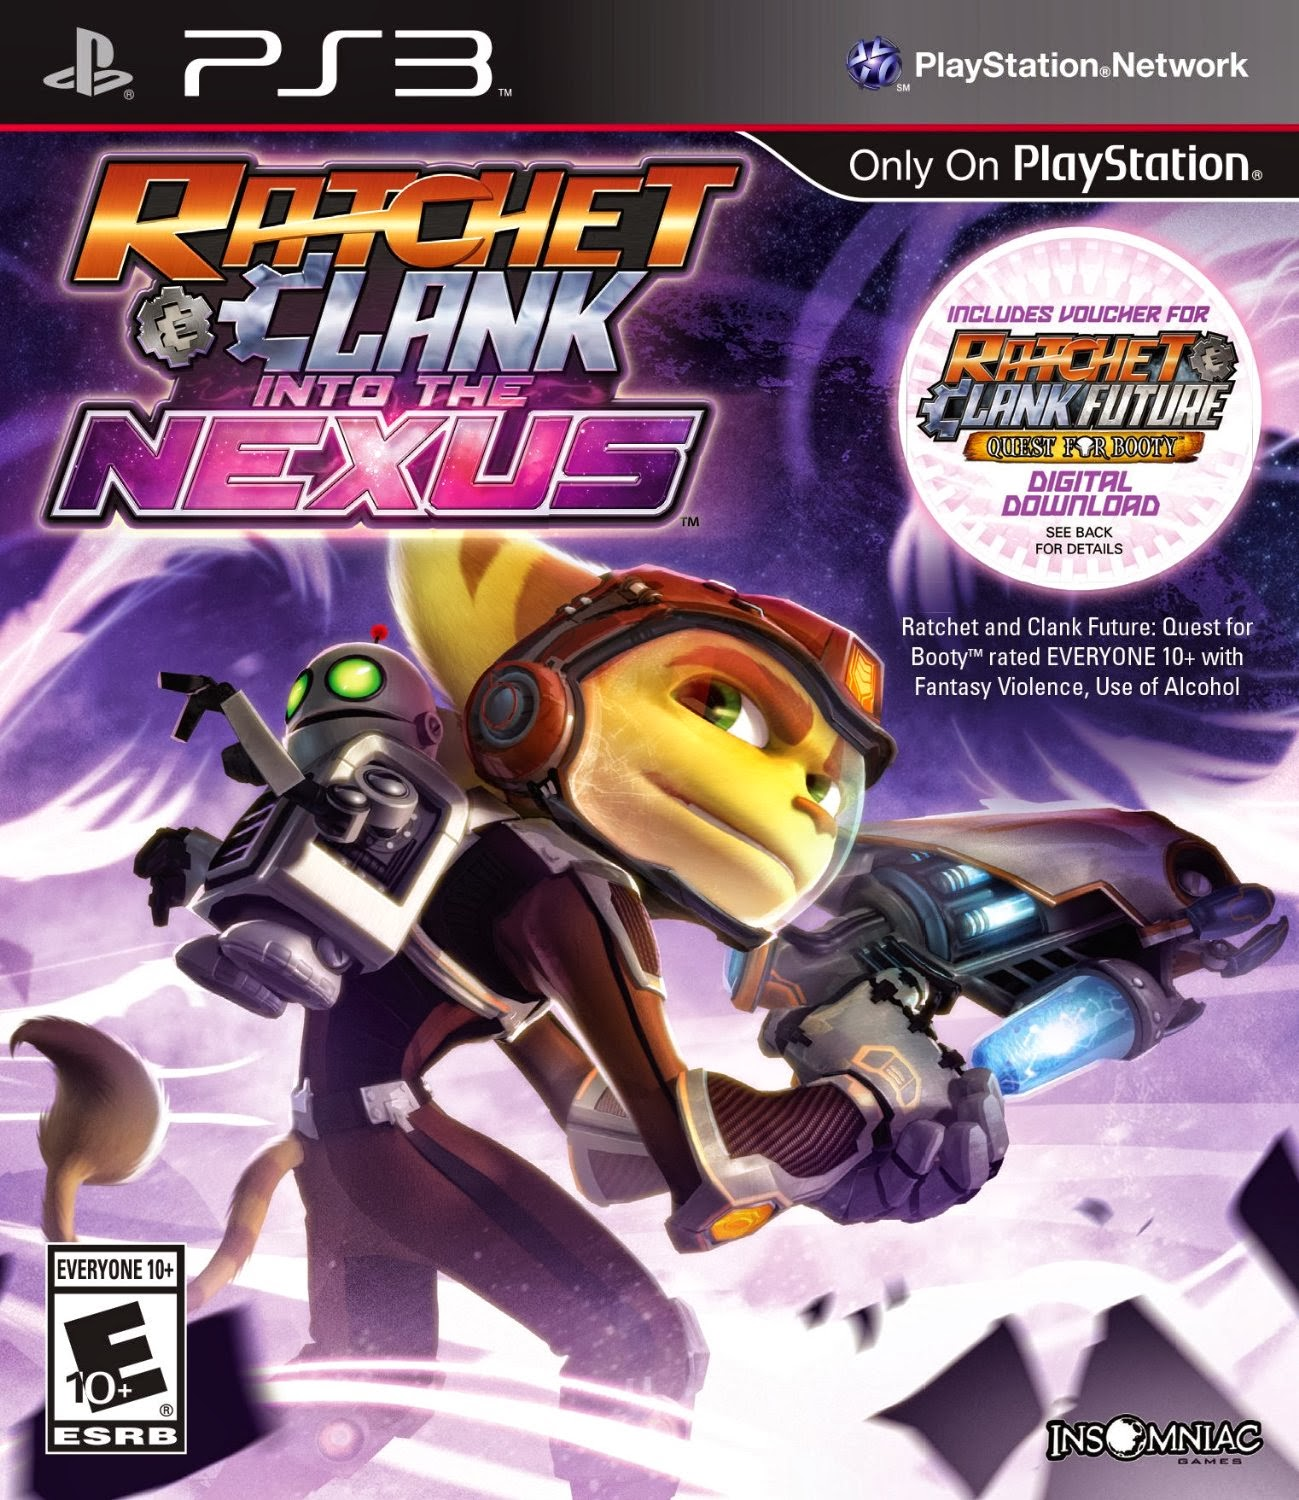 Insomniac Games reveals new 'Ratchet & Clank' game for the PS5